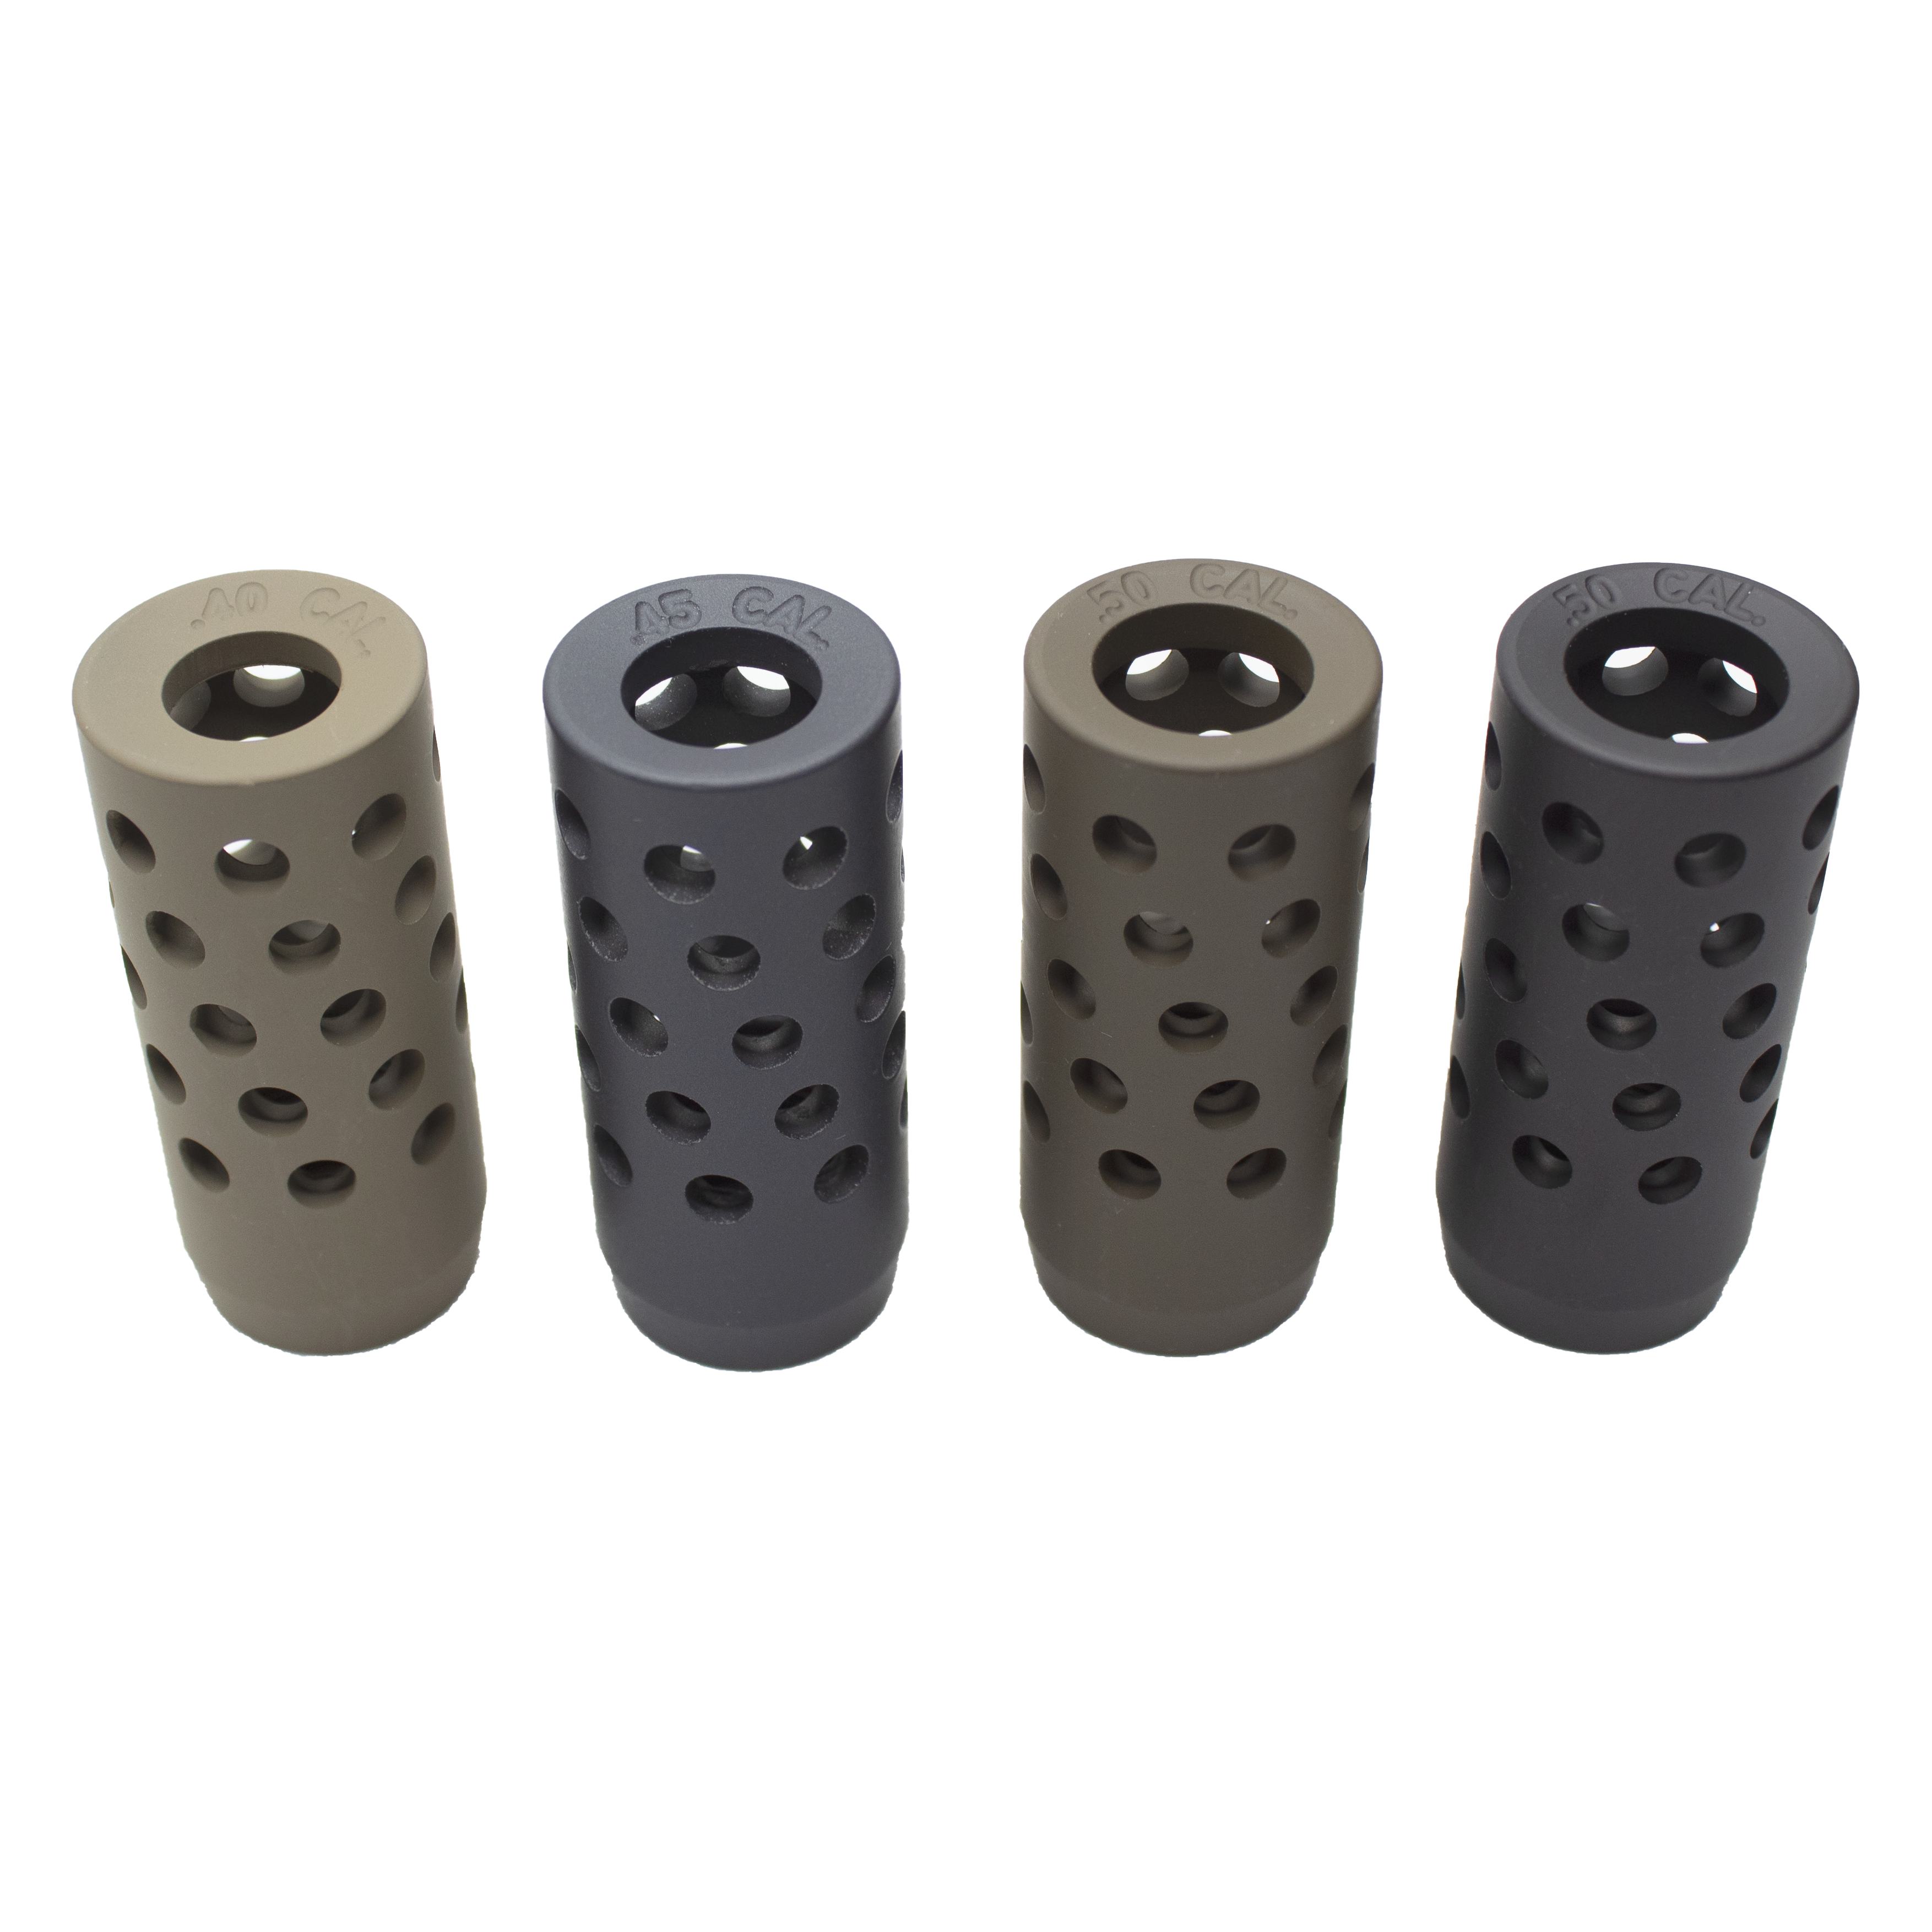 Can you use the pelletized powder with this muzzle break